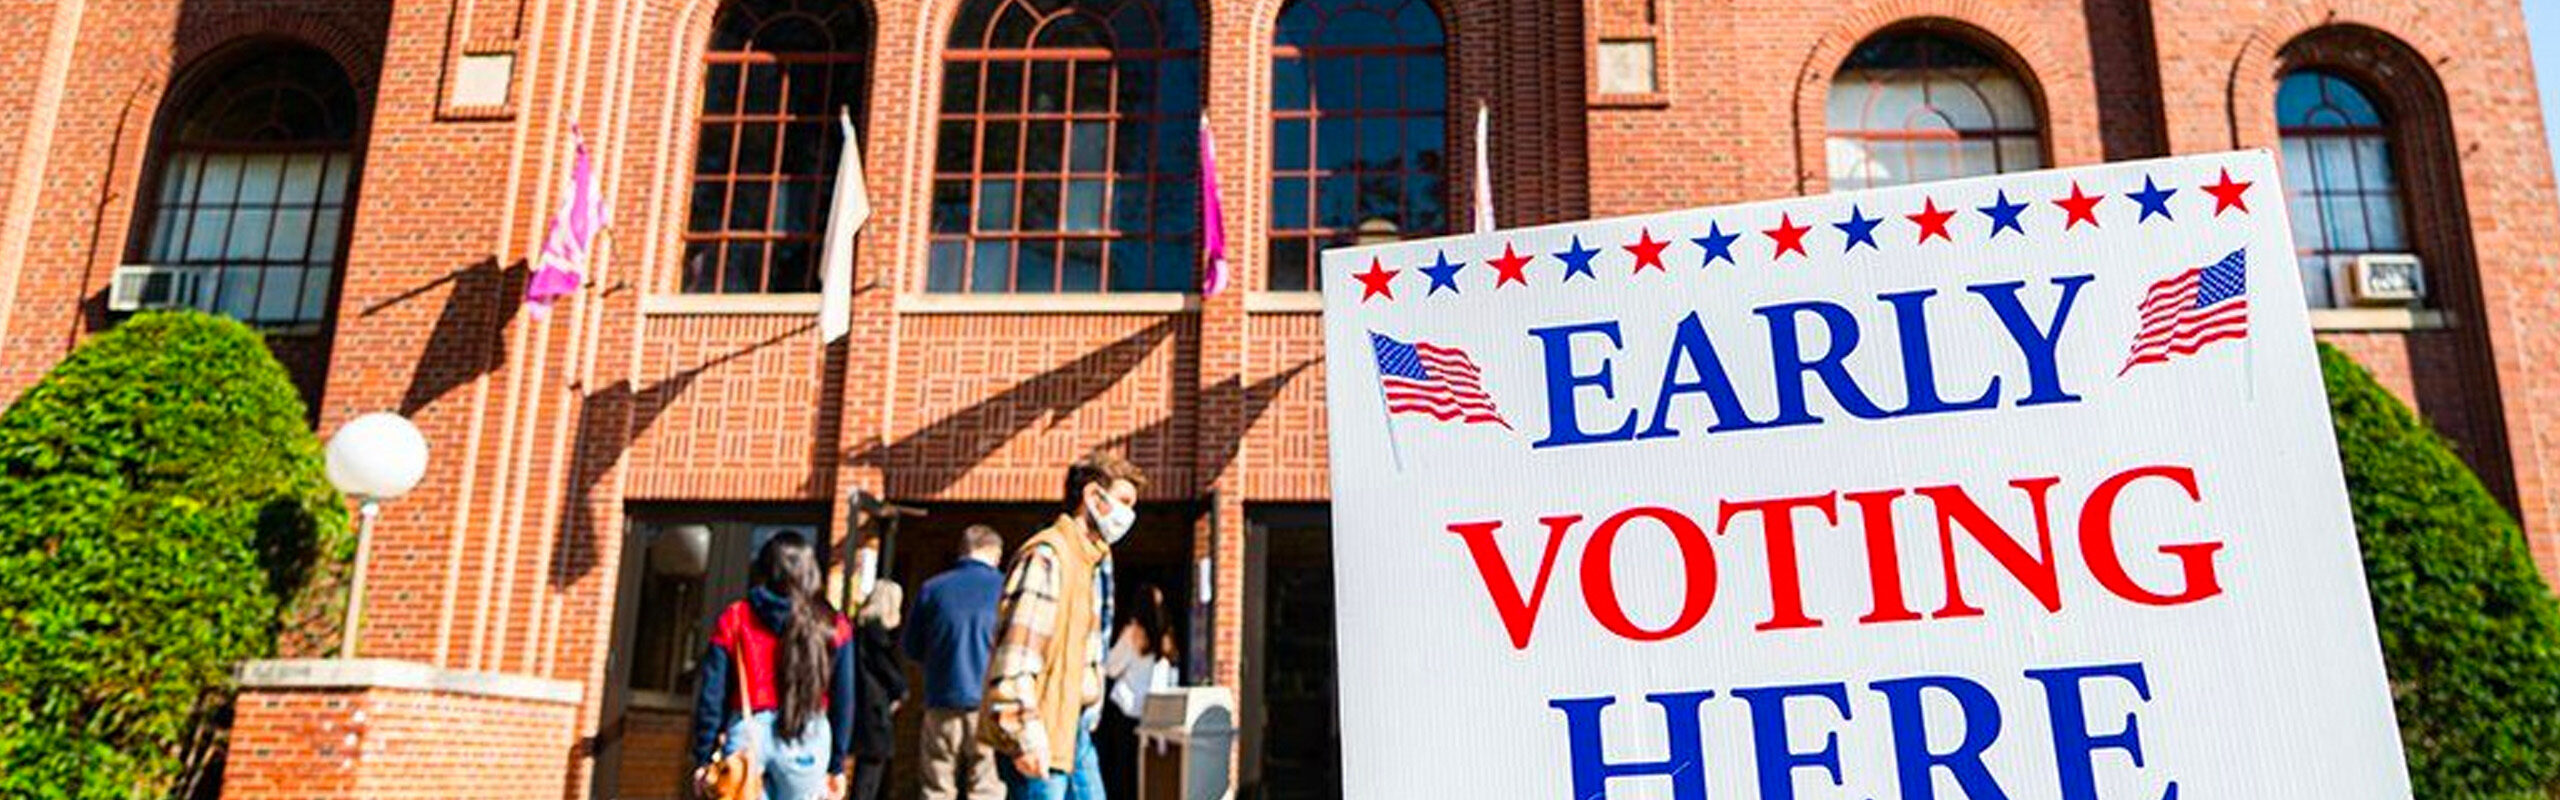 Vote Early sign posted by Politics students